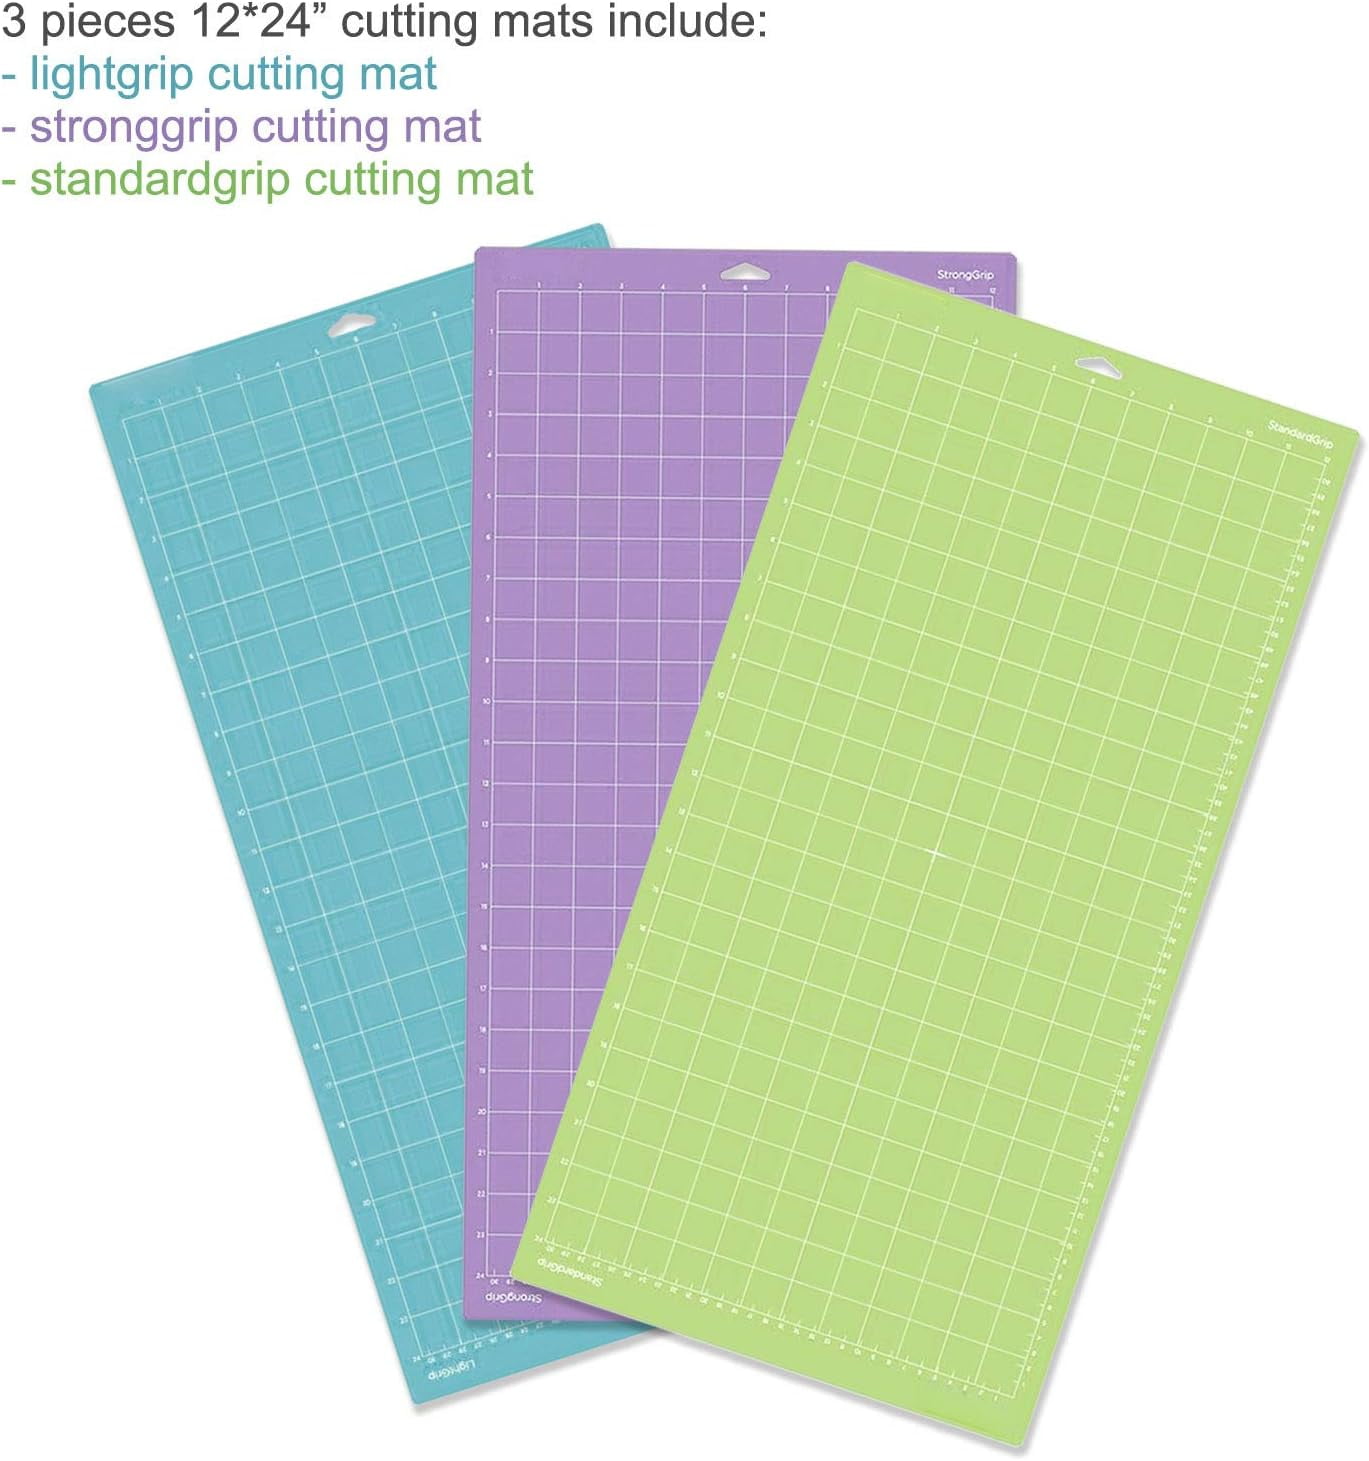 AOOIIN Cutting Mat for Cricut Explore One/Air/Air 2/Maker 3 Packs Cut Mats Replacement Accessories for Cricut (Multicolor for Cricut, Variety)